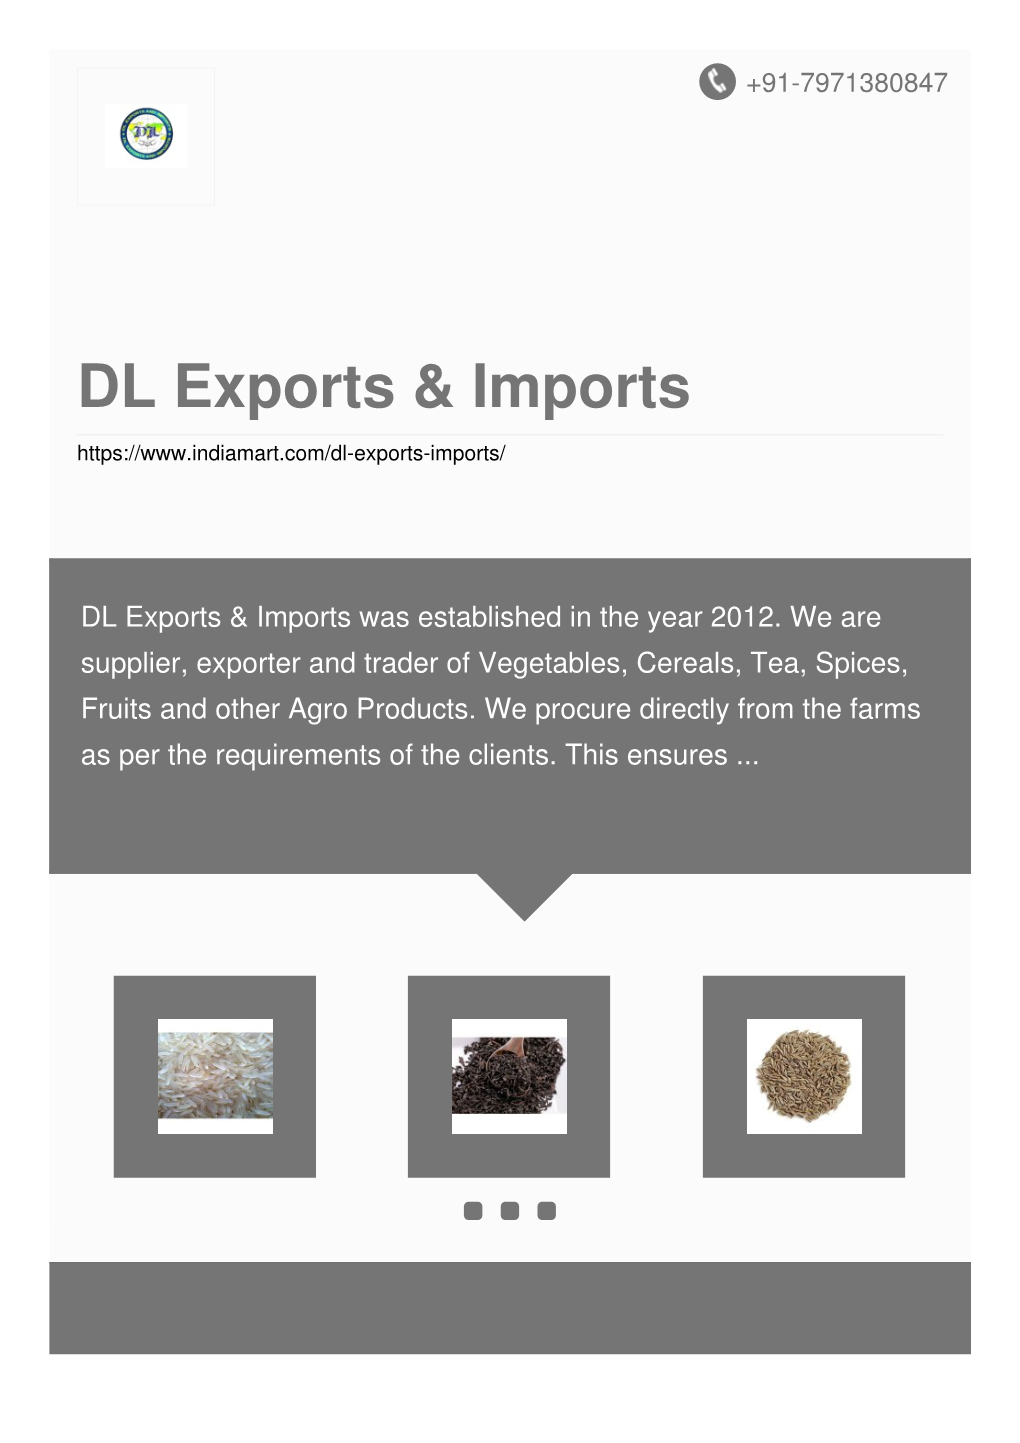 DL Exports & Imports